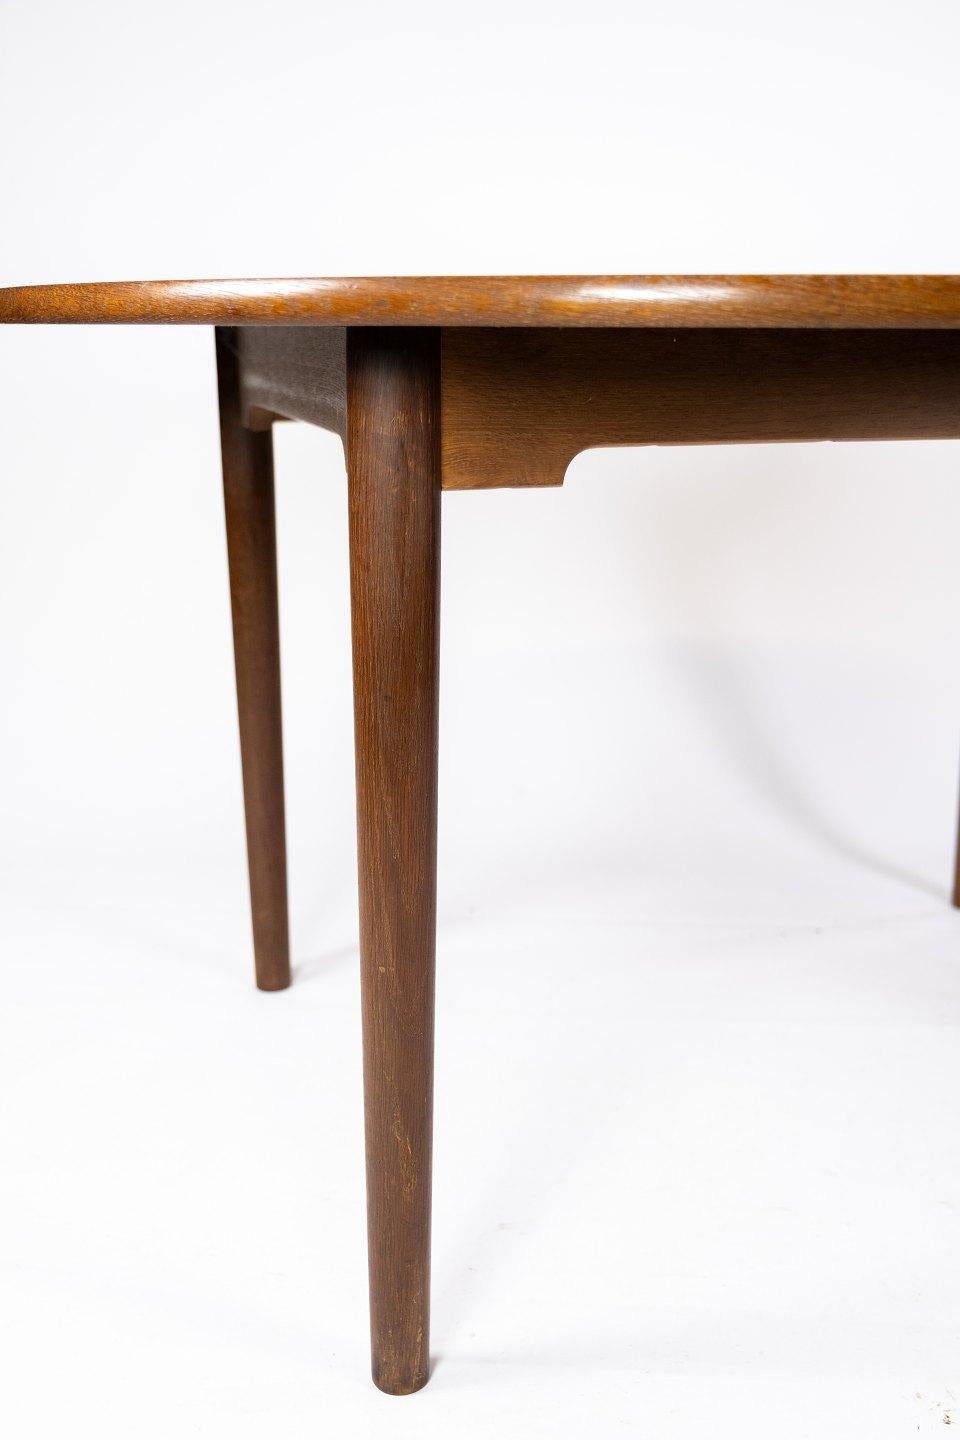 Mid-Century Modern Dining Table Made In Dark Oak, Danish Design From 1960s For Sale